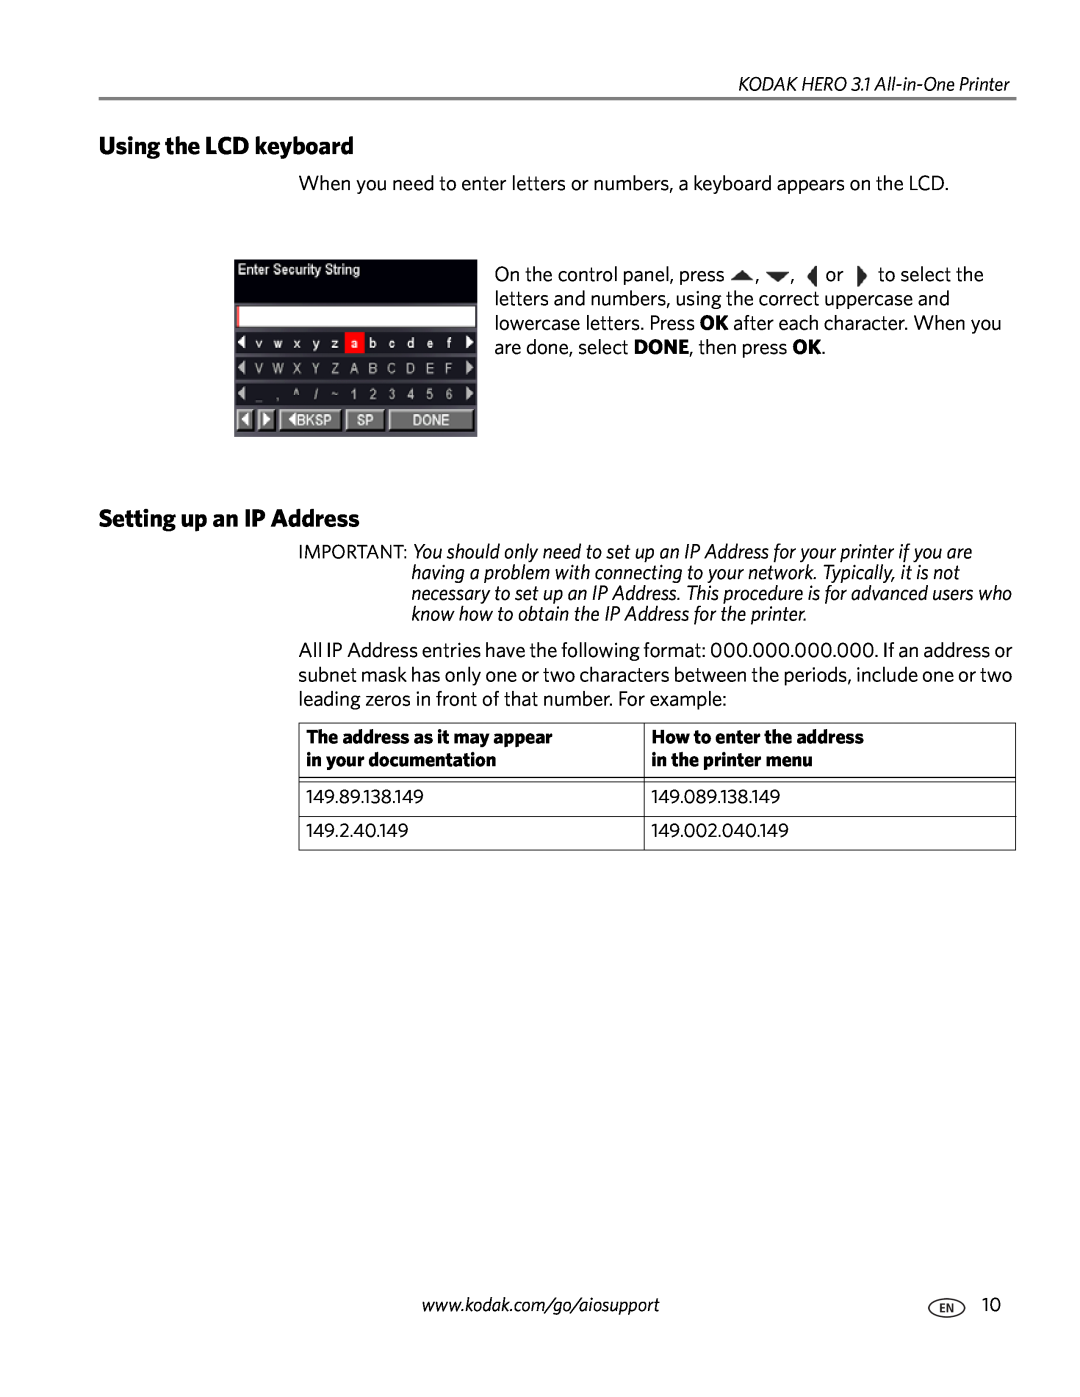 Kodak 3.1 manual Using the LCD keyboard, Setting up an IP Address, The address as it may appear in your documentation 